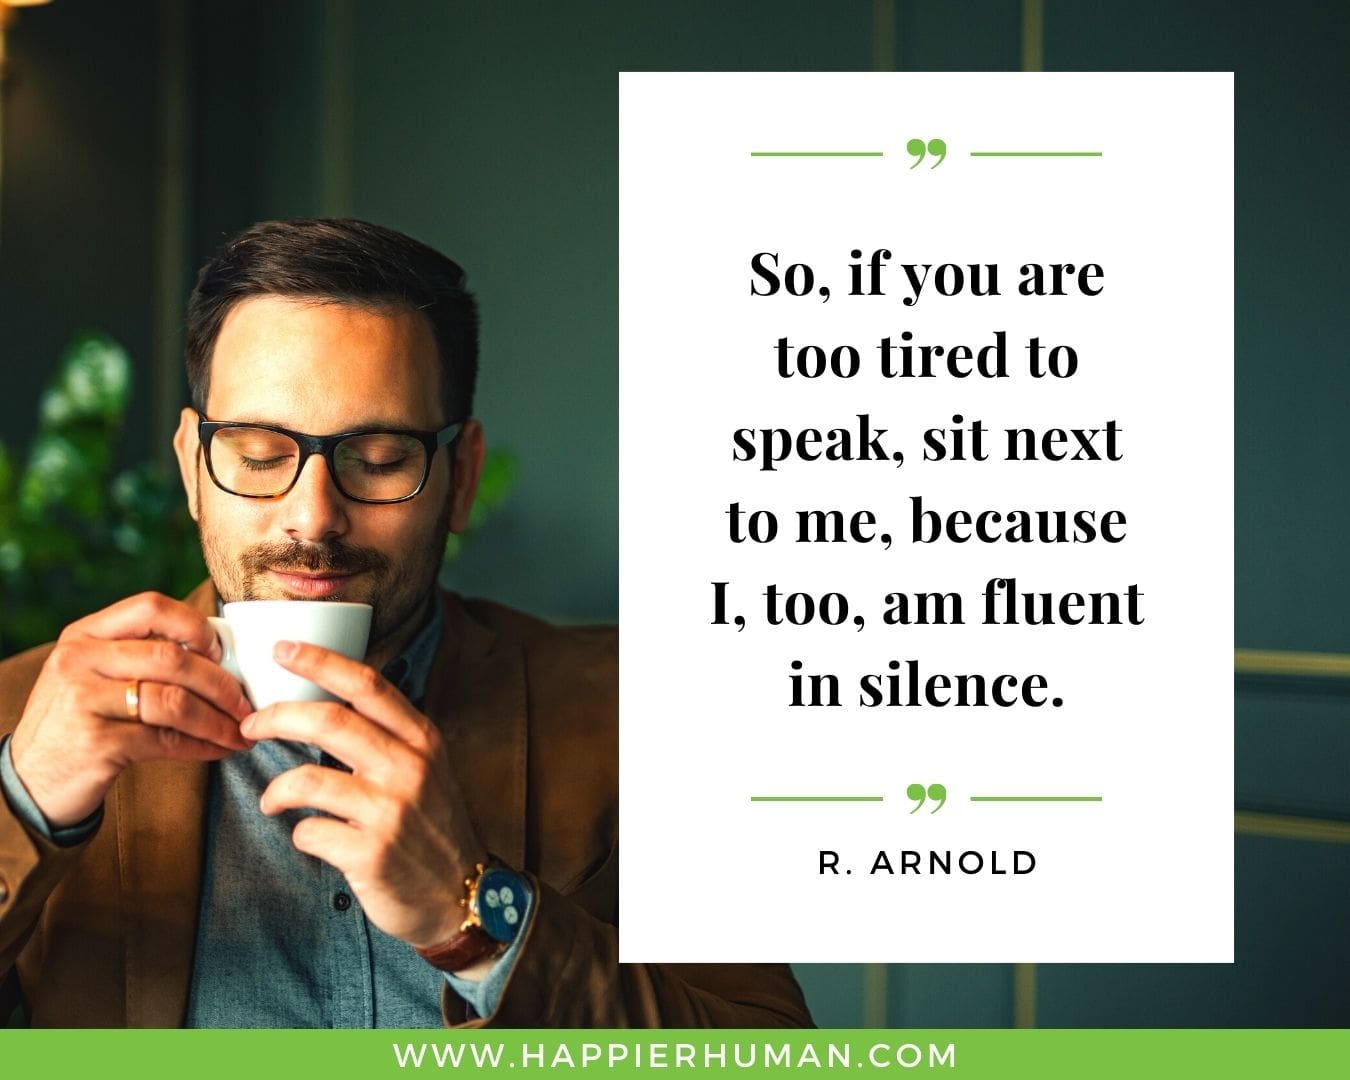 Introvert Quotes - “So, if you are too tired to speak, sit next to me, because I, too, am fluent in silence.” – R. Arnold